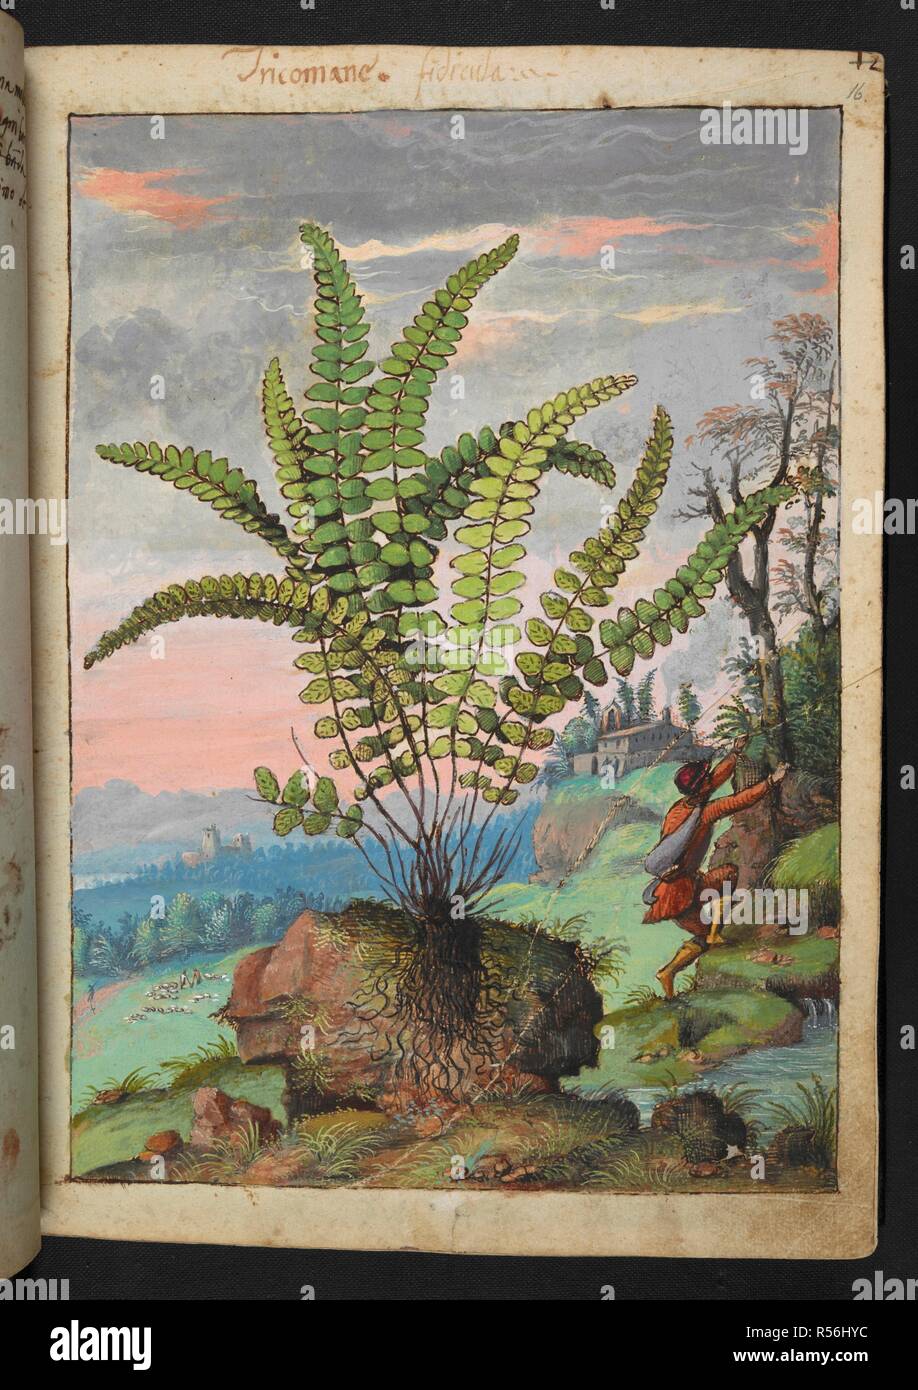 'Tricomane.' Trichomanes is a large genus of ferns in the family Hymenophyllaceae, termed bristle ferns. Coloured drawings of plants, copied from nature in the Roman States, by Gerardo Cibo. Vol. I. Pietro Andrea Mattioli, Physician, of Siena: Extracts from his edition of Dioscorides' 'de re Medica':. Italy, c. 1564-1584. Source: Add. 22332 f.16. Language: Italian. Author: Cibo, Gheraldo. Stock Photo